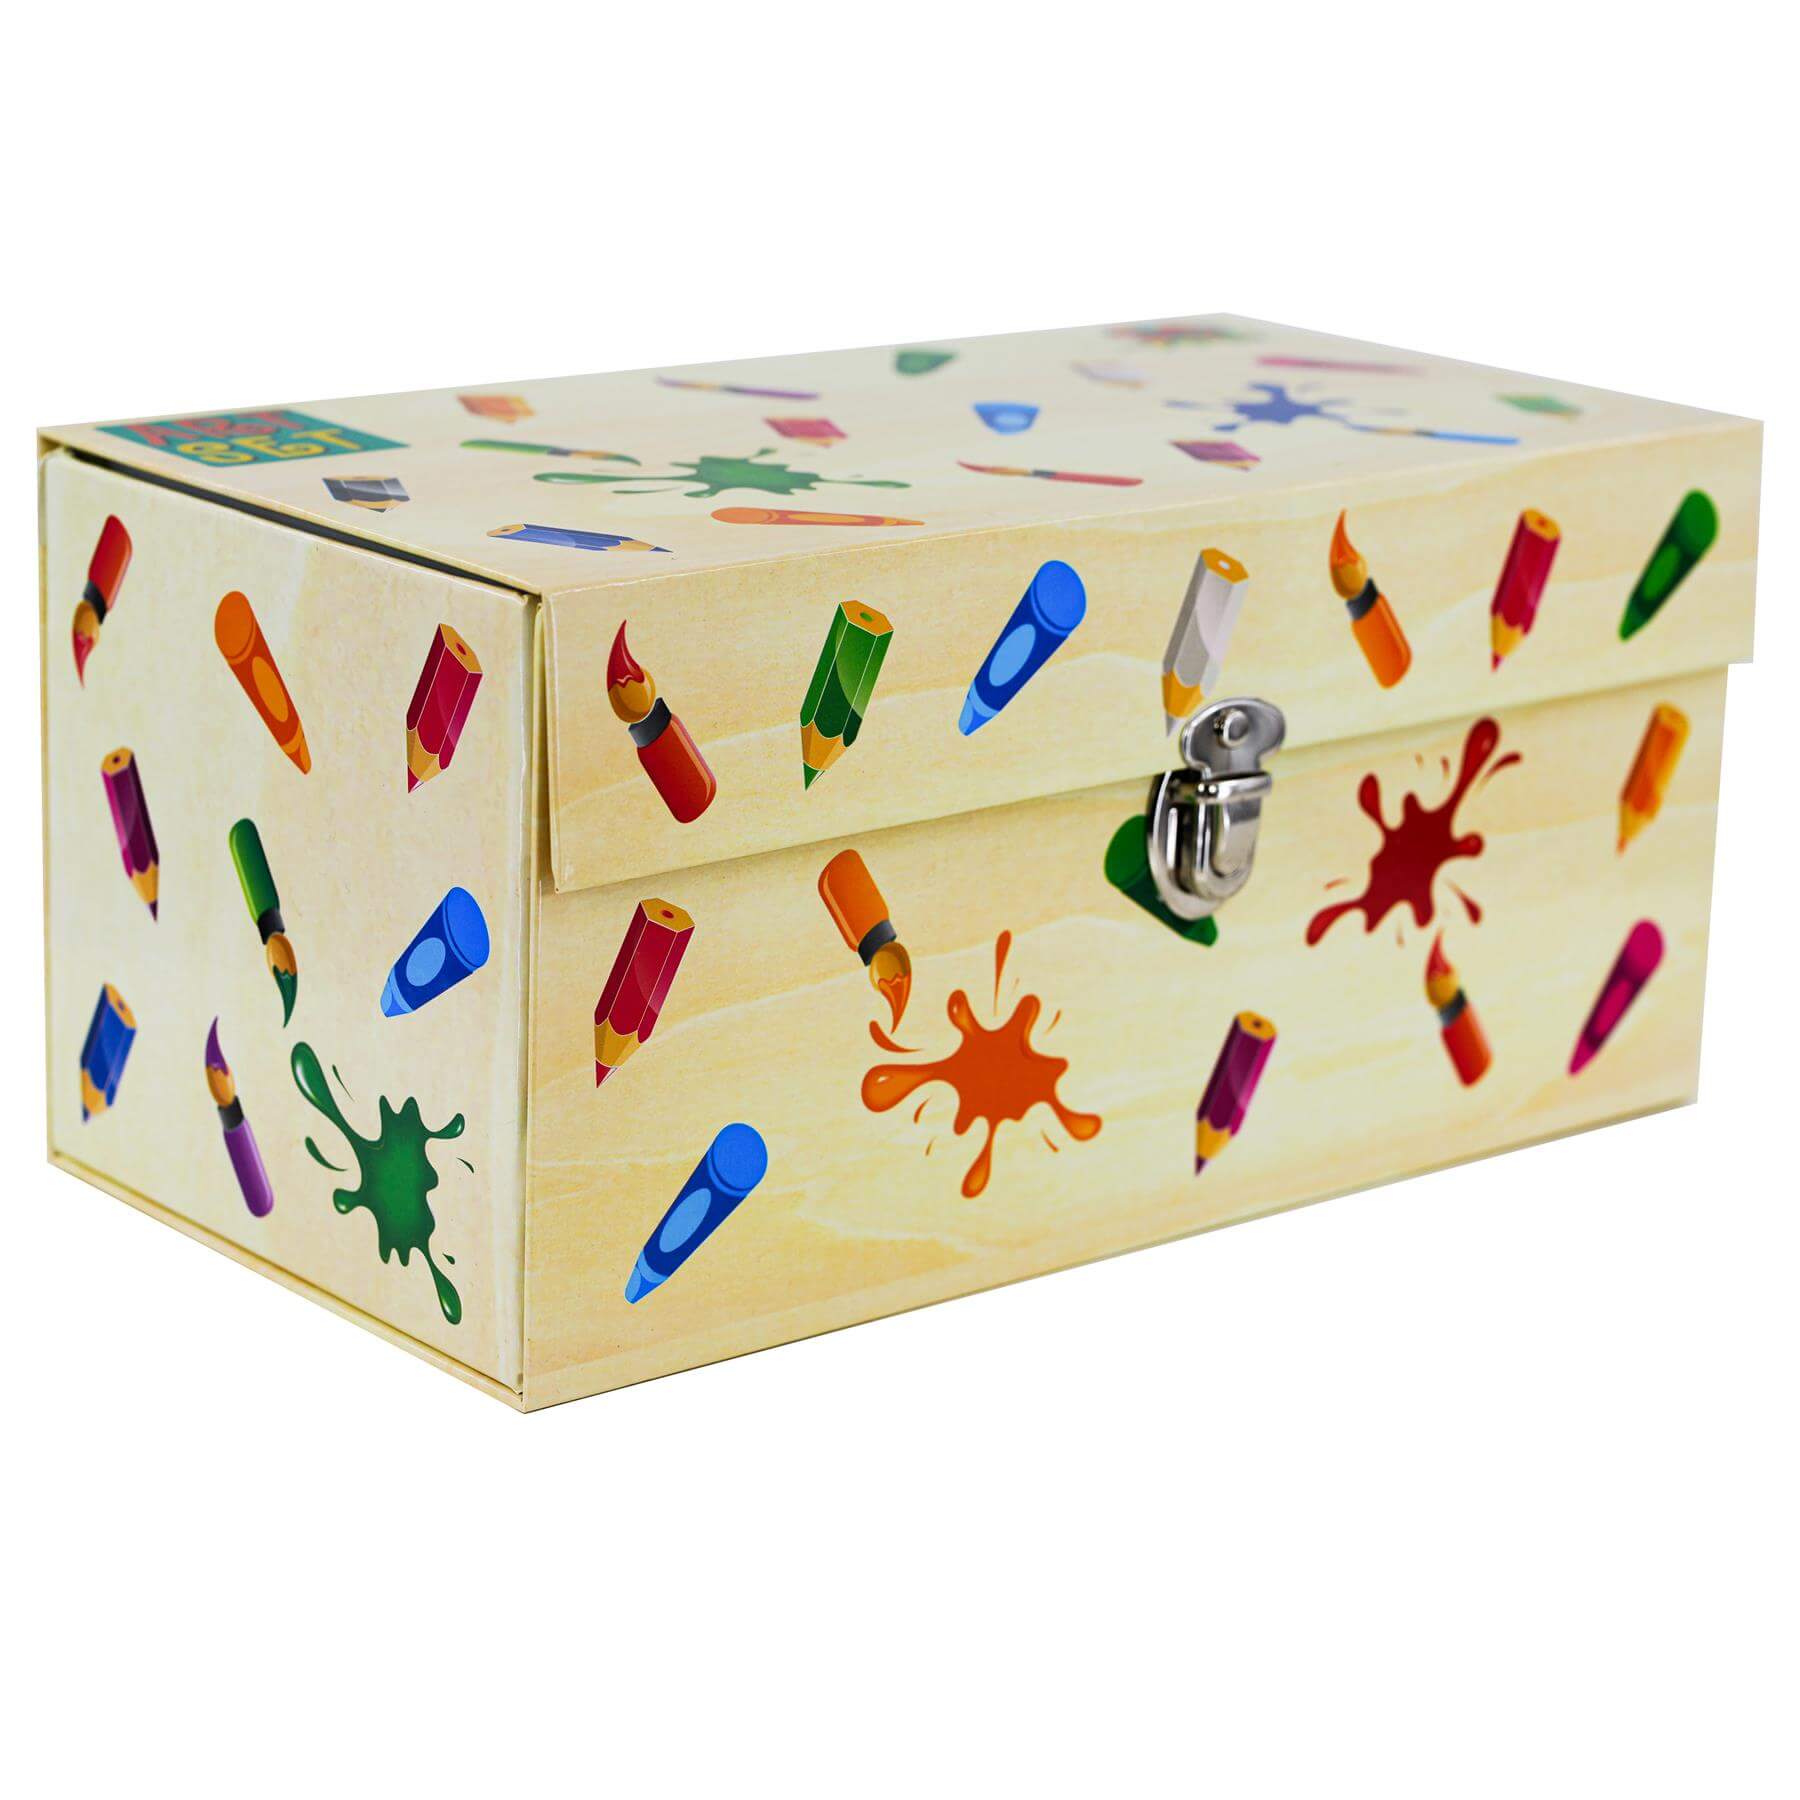 54 Pieces Craft Art Set in A Box by MTSThe Magic Toy Shop